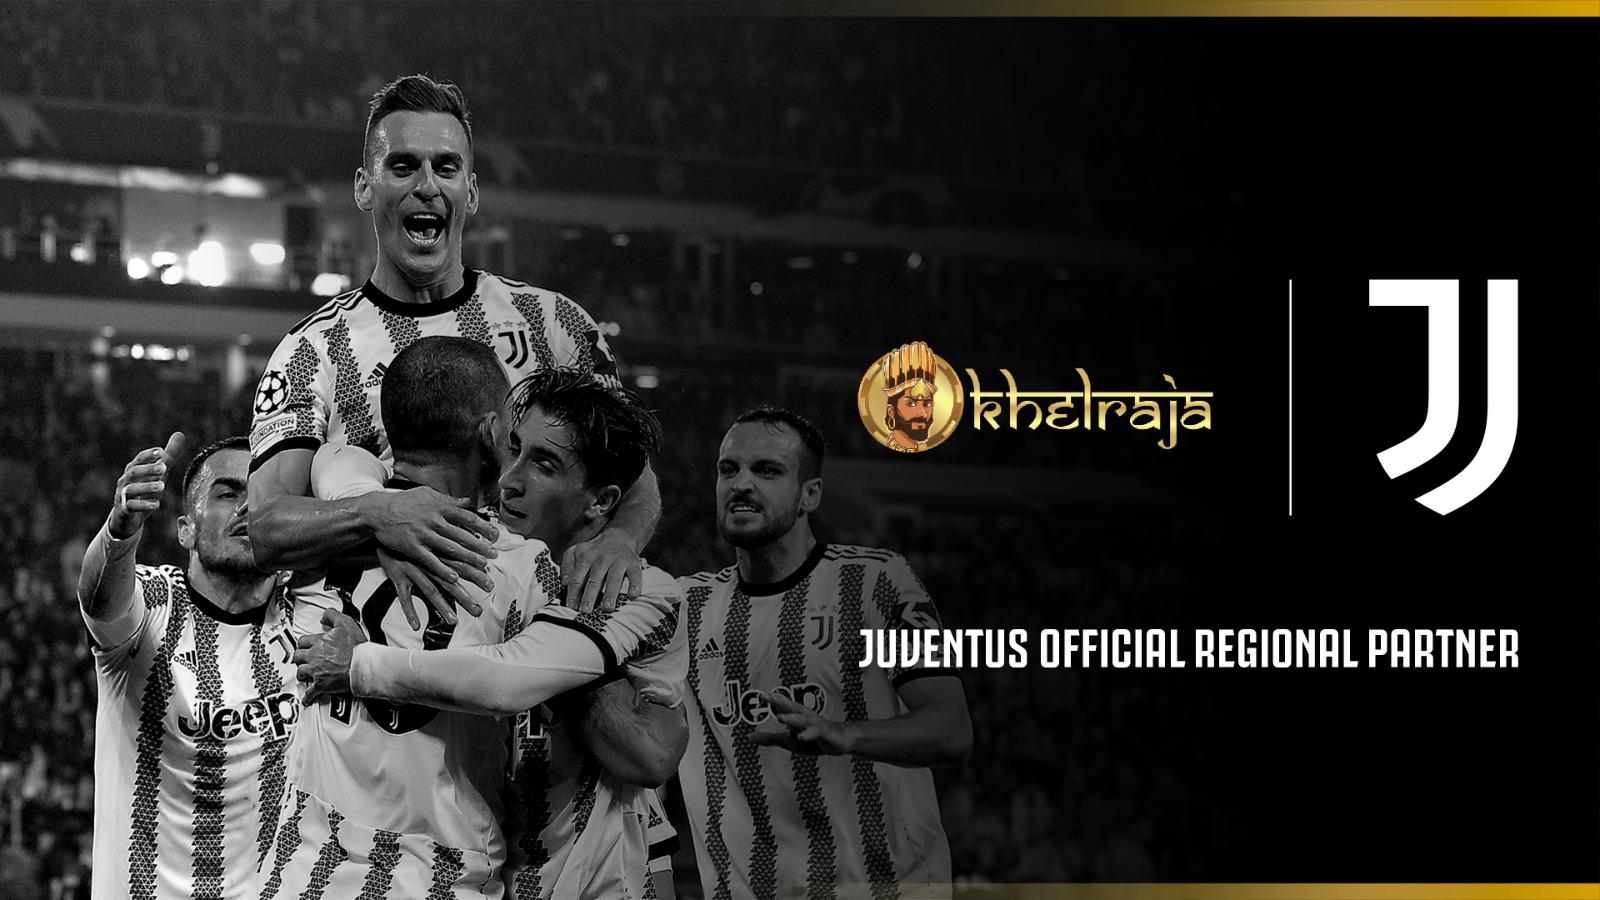 Juventus Collaborates With Khelraja As Its Official Regional Partner